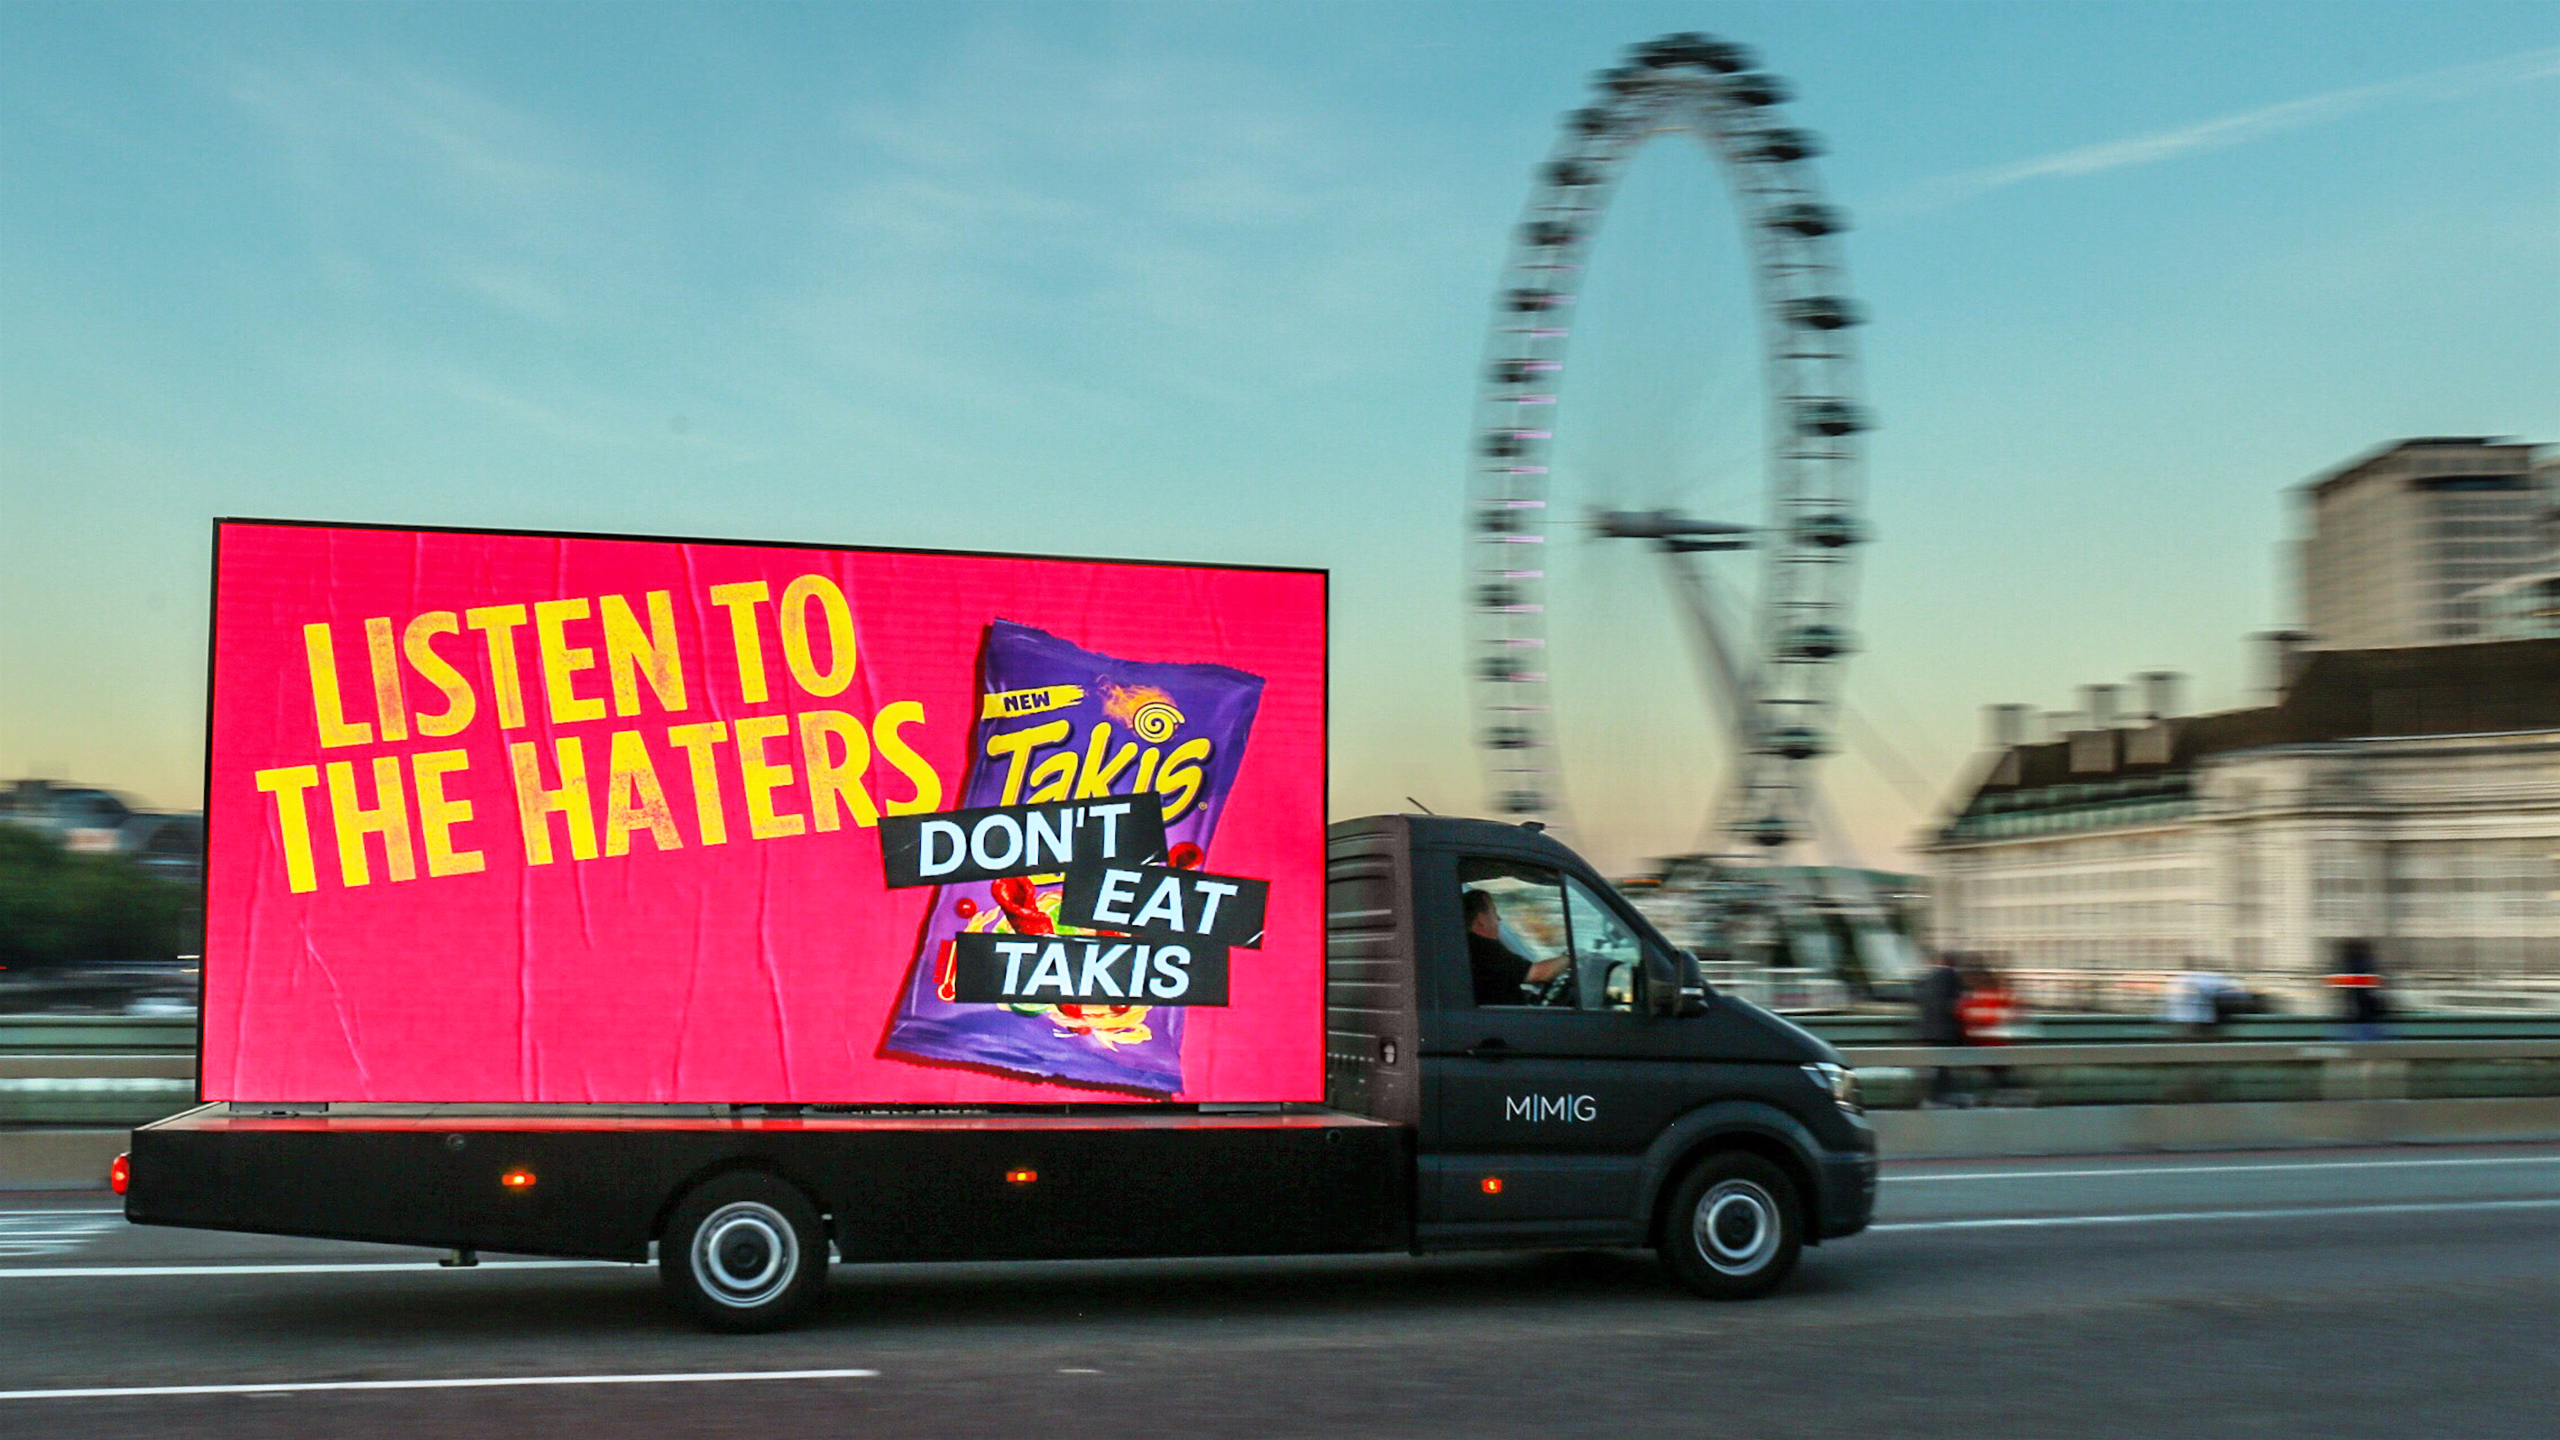 'Don’t Eat Takis': Mexican snack brand Takis launches in UK